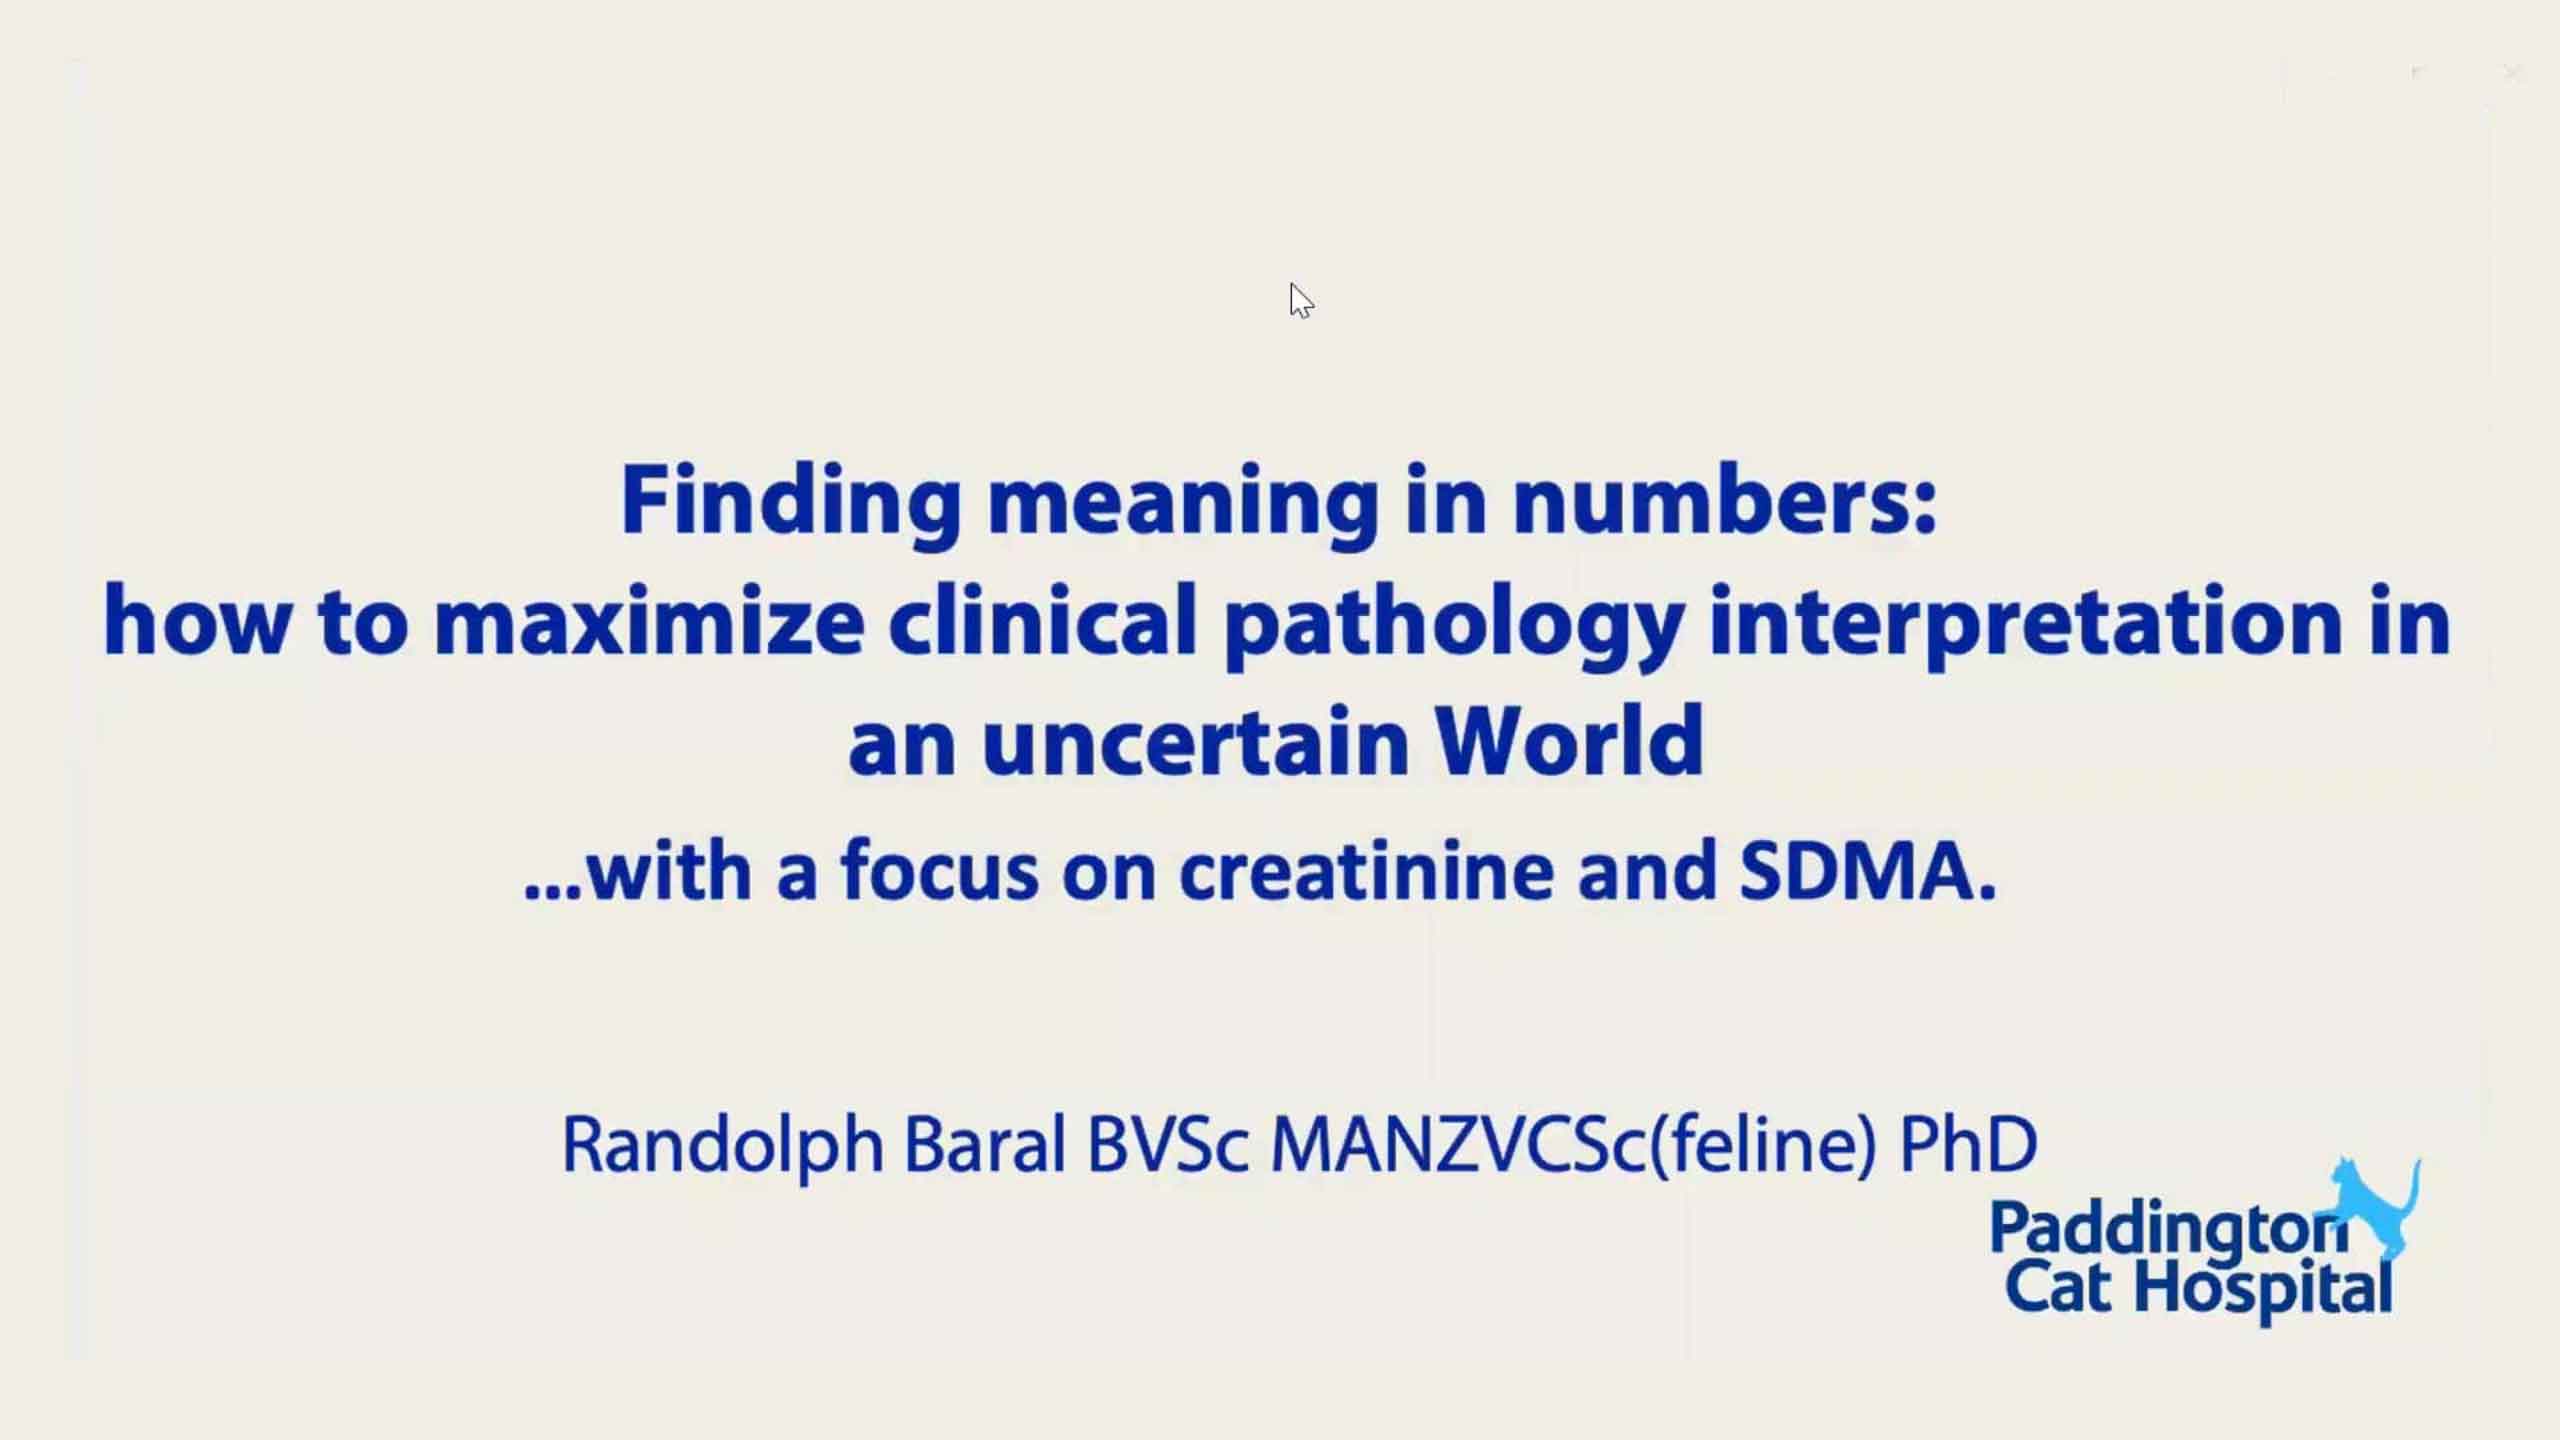 Finding meaning in numbers: SDMA and creatinine